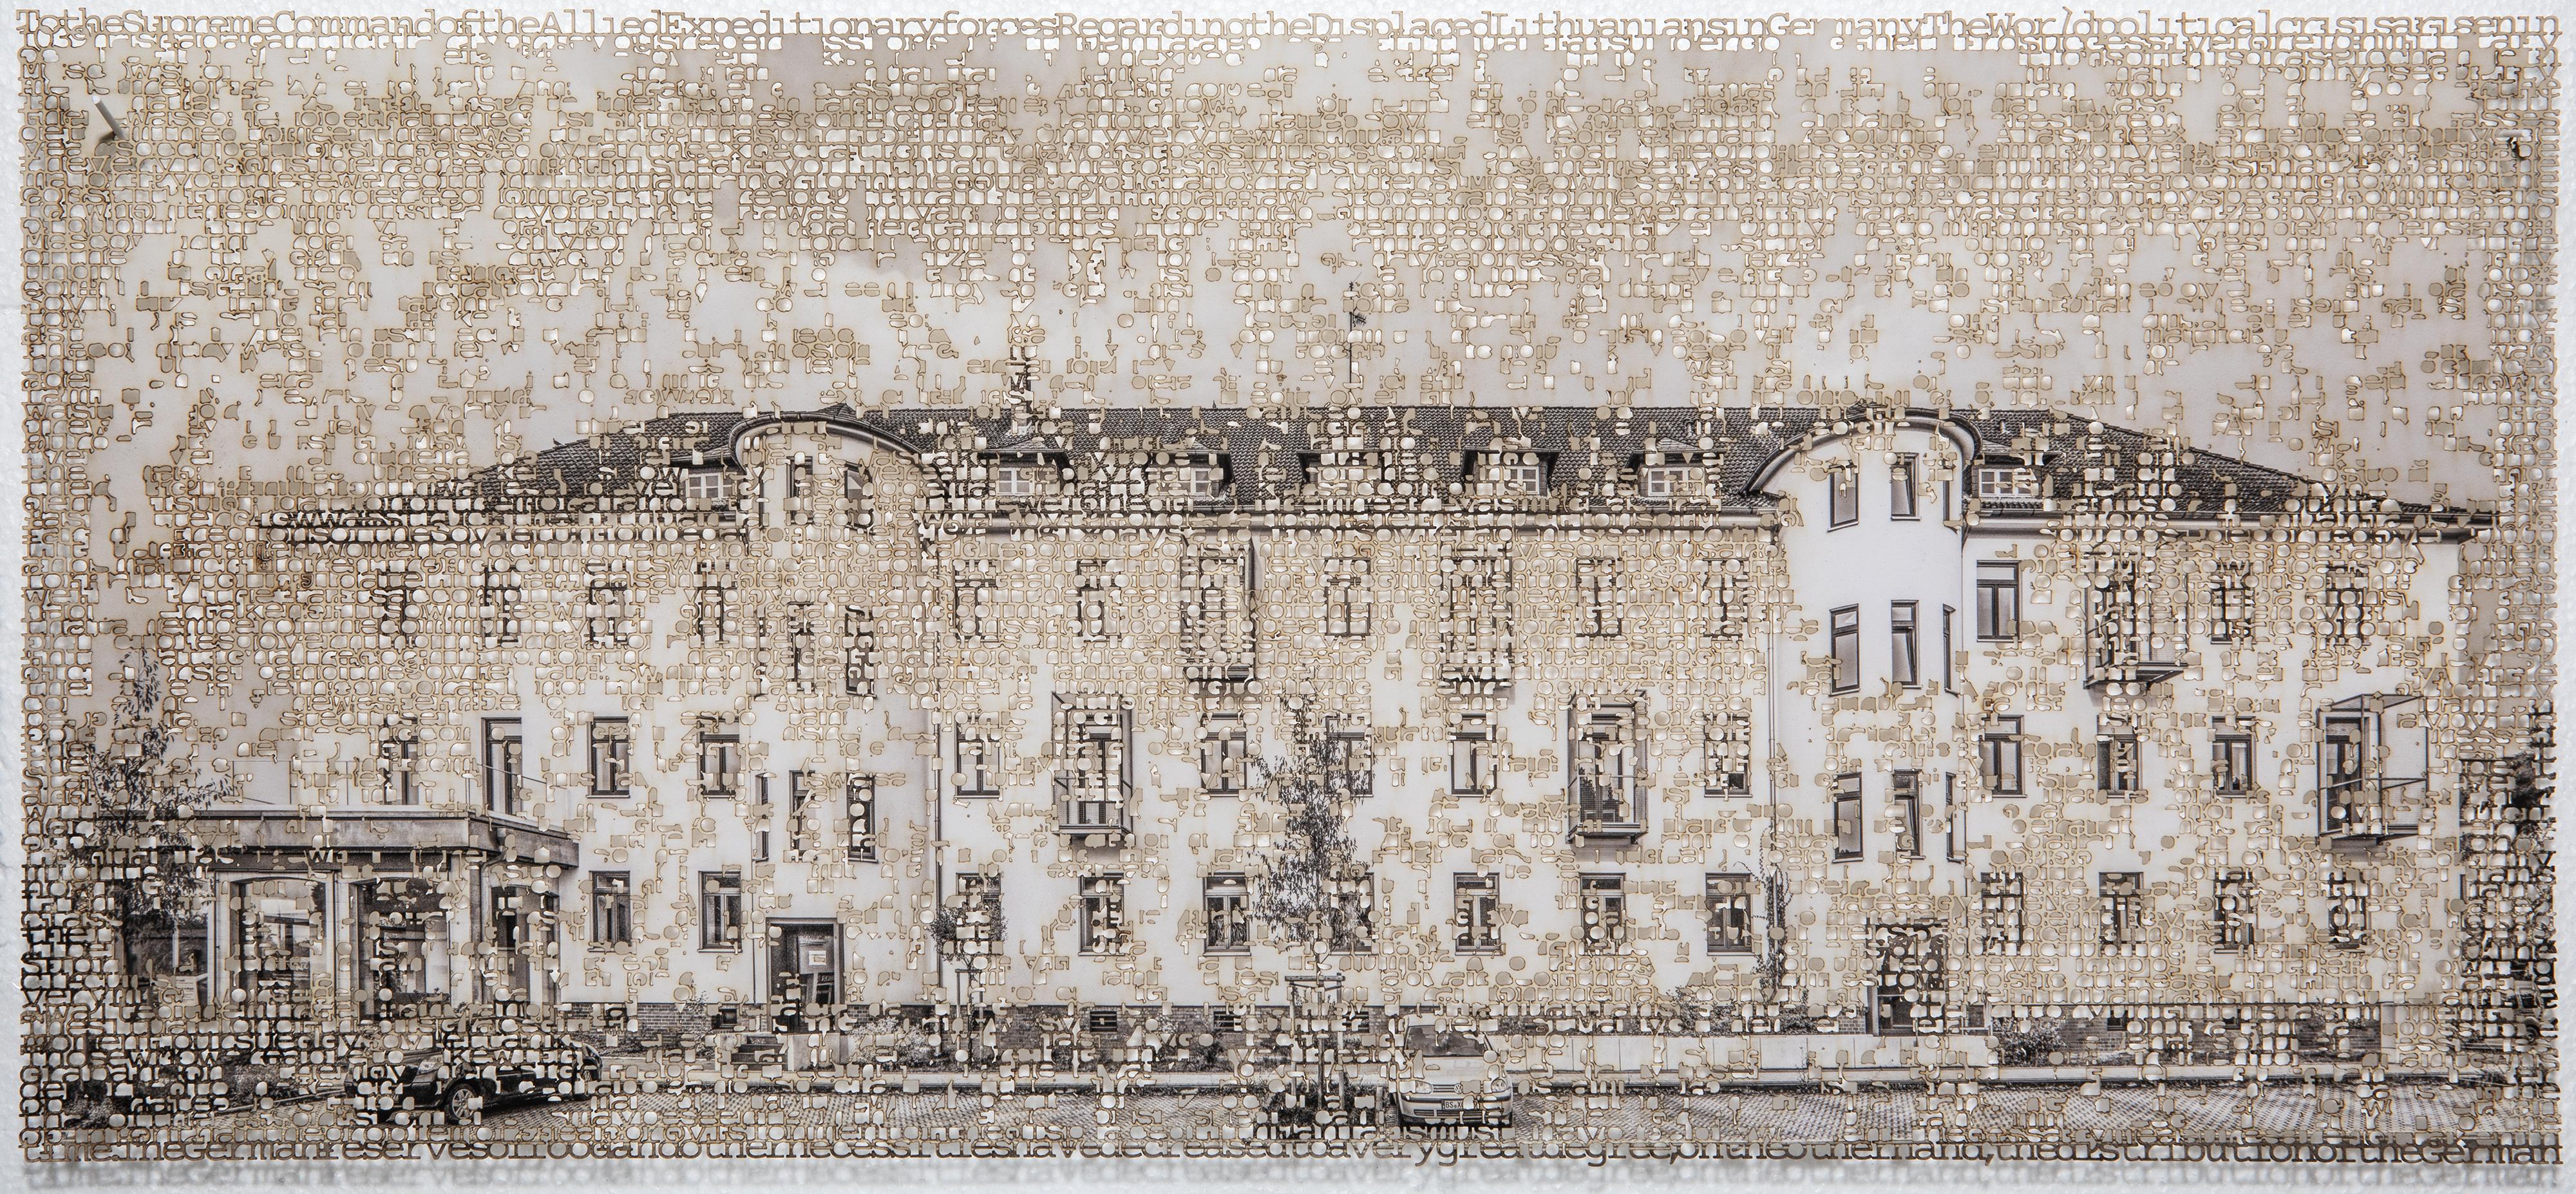 Krista Svalbonas Black and White Photograph - Braunschweig 1,  Laser cut archival pigment ink print, signed, numbered, framed